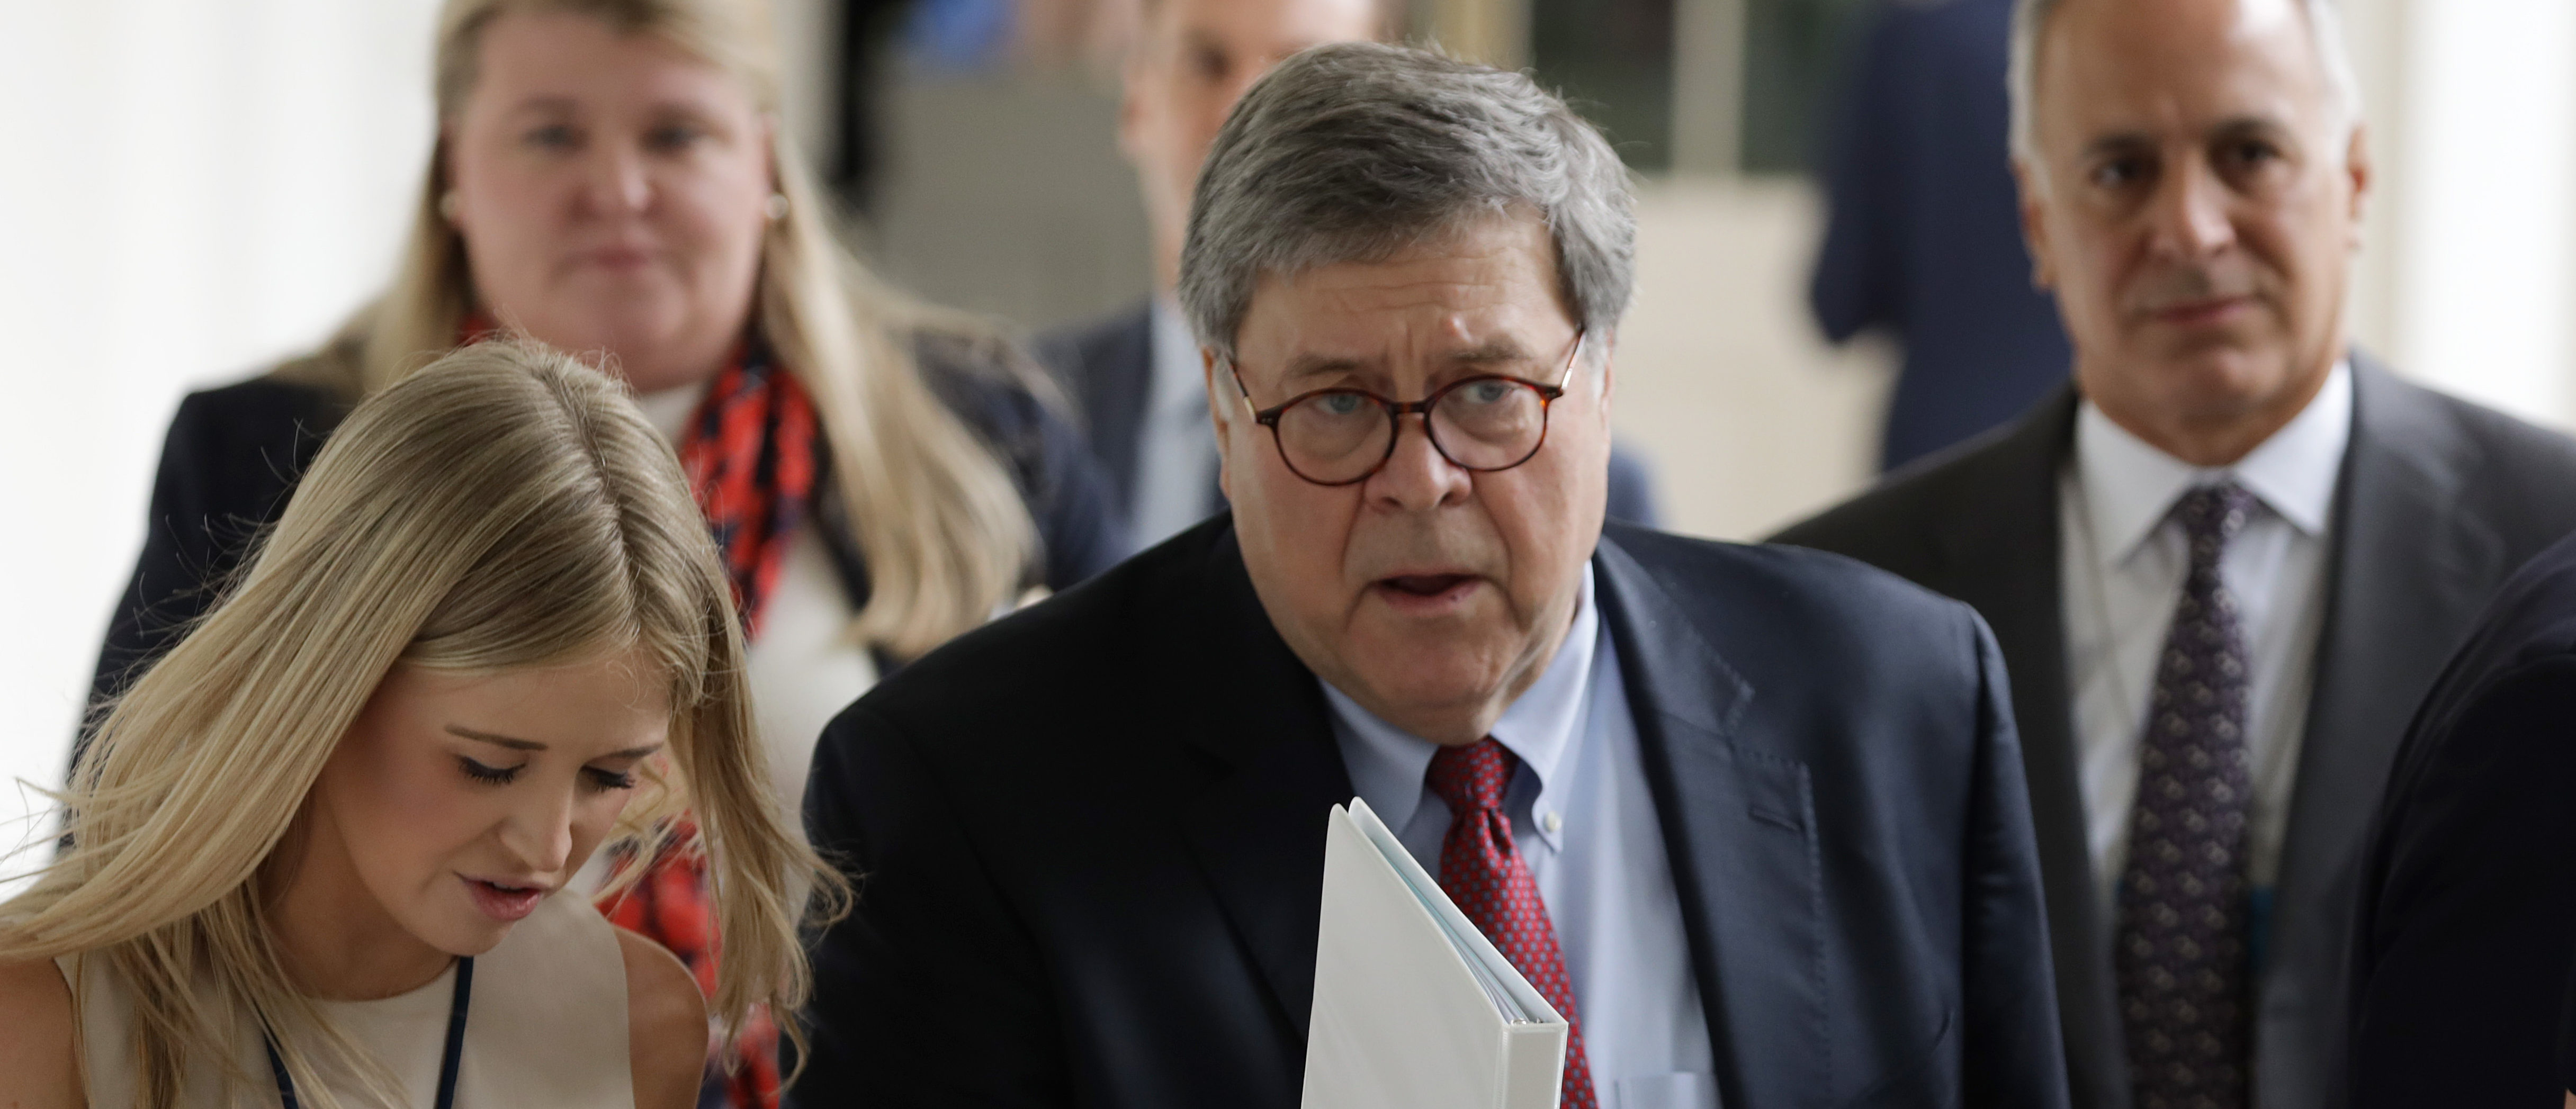 U.S. Attorney General William Barr is escorted to the Rose Garden for an event on “Safe Policing for Safe Communities”, at the White House June 16, 2020 in Washington, DC. (Alex Wong/Getty Images)